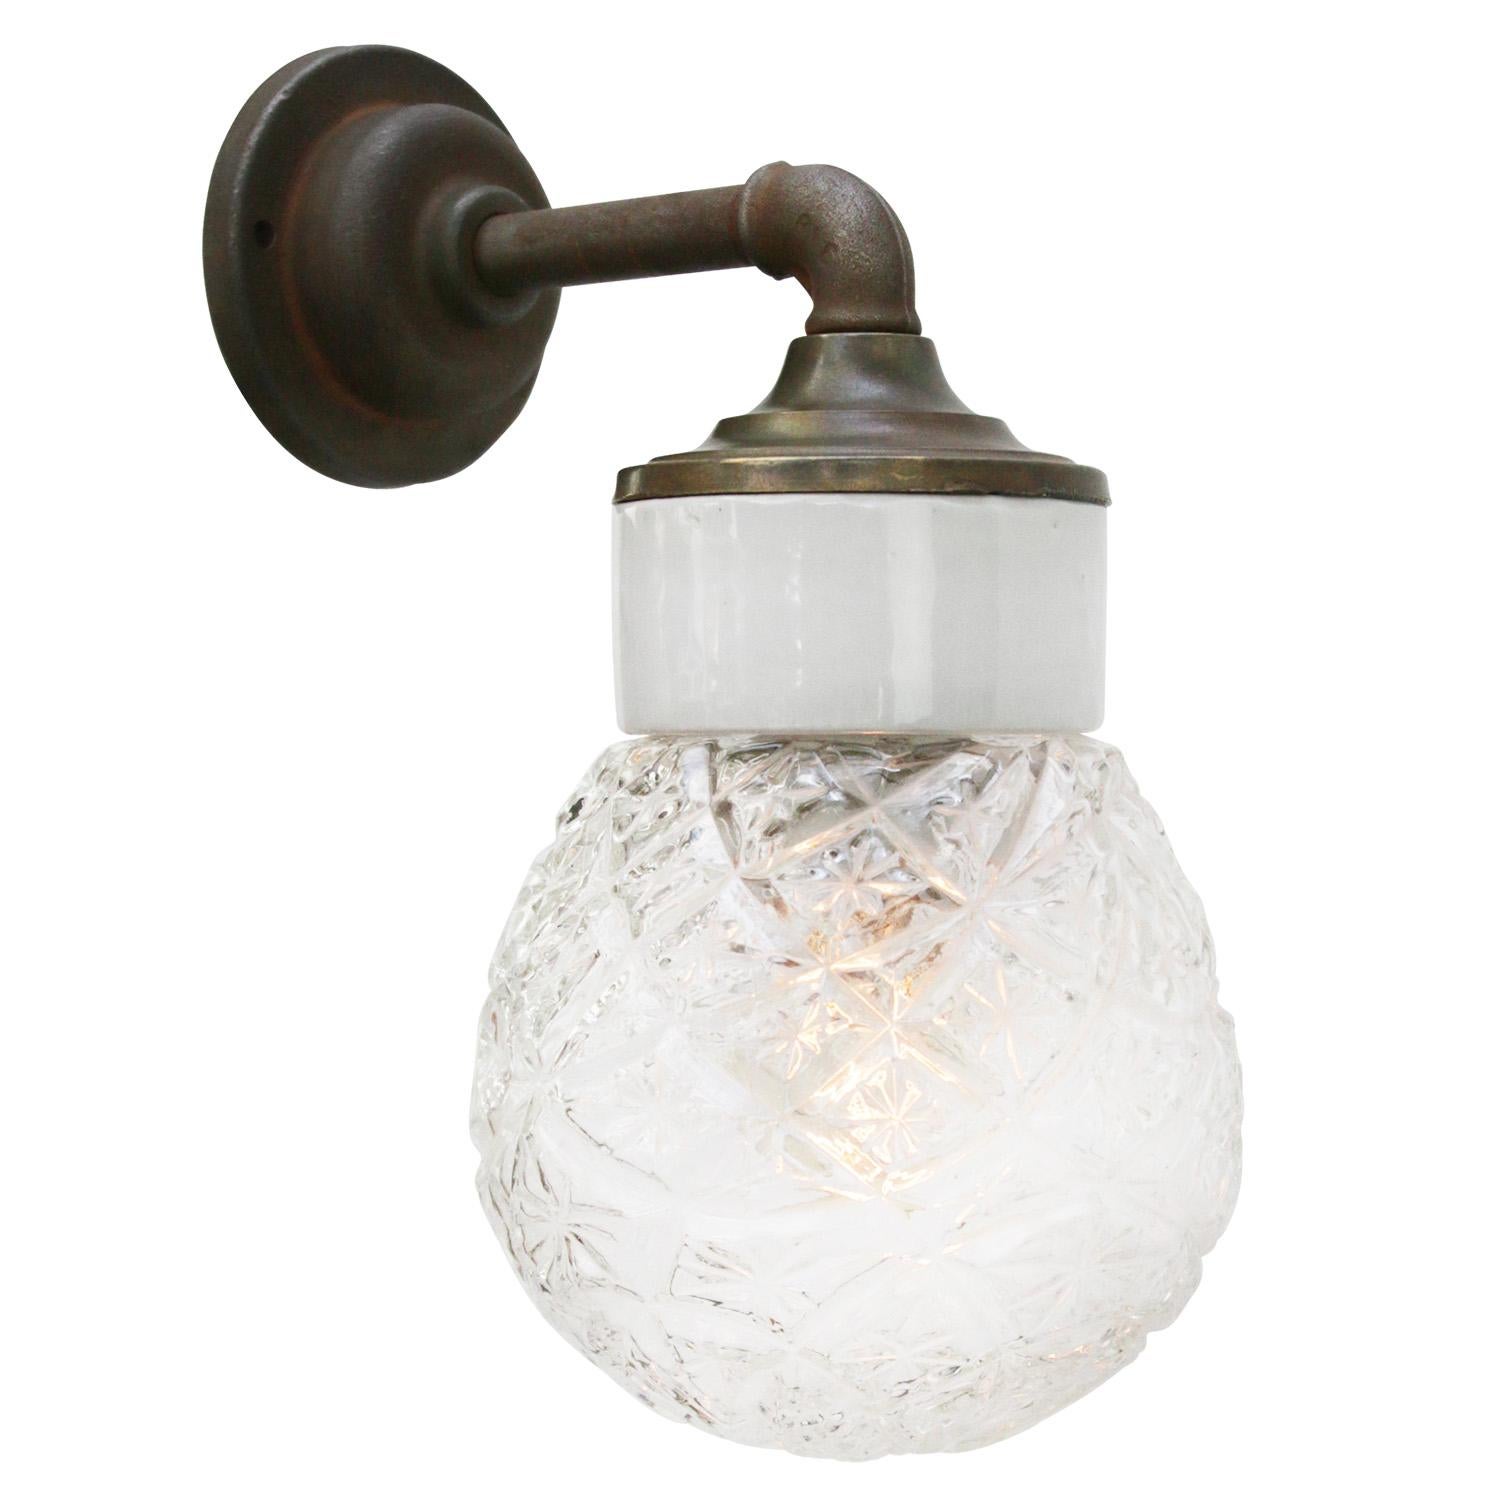 Porcelain industrial wall lamp.
White porcelain, cast iron, brass and clear glass.
2 conductors, no ground.

Diameter wall mount 10.5 cm / 4”.
2 holes to secure.

For use inside only

Measures: Weight: 2.05 kg / 4.5 lb

Priced per individual item.